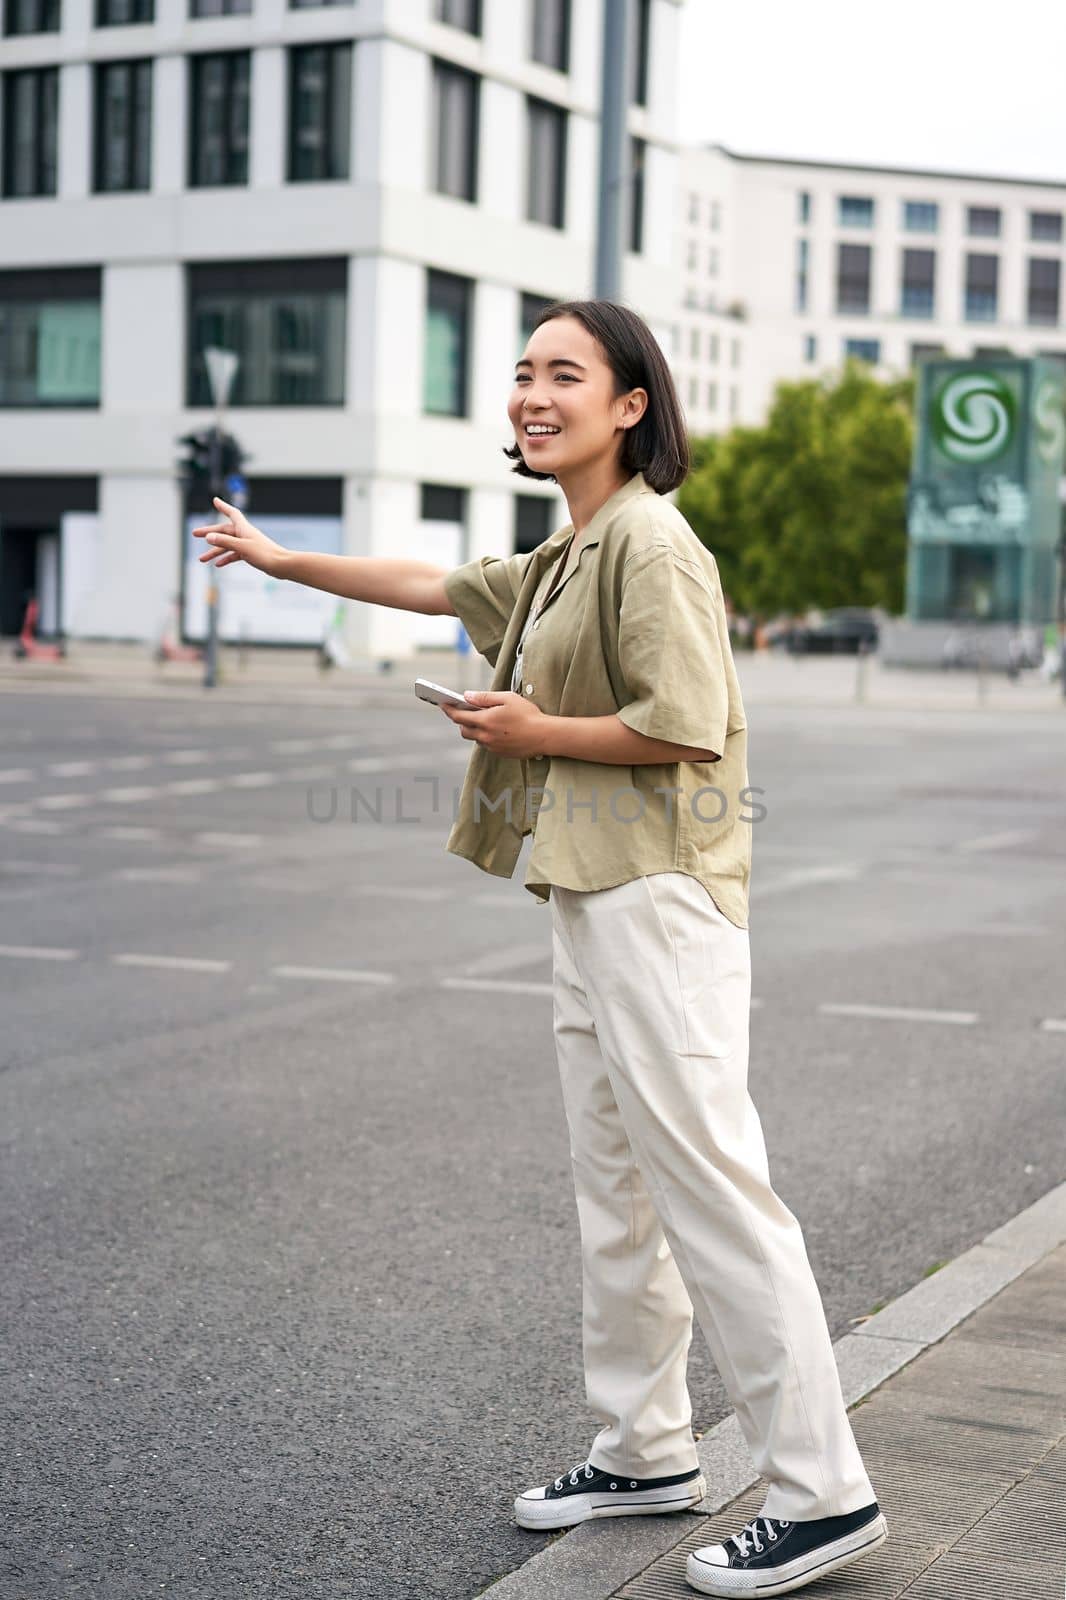 Car sharing and technology. Young asian woman waiting for taxi near road, holding smartphone, order car in application.